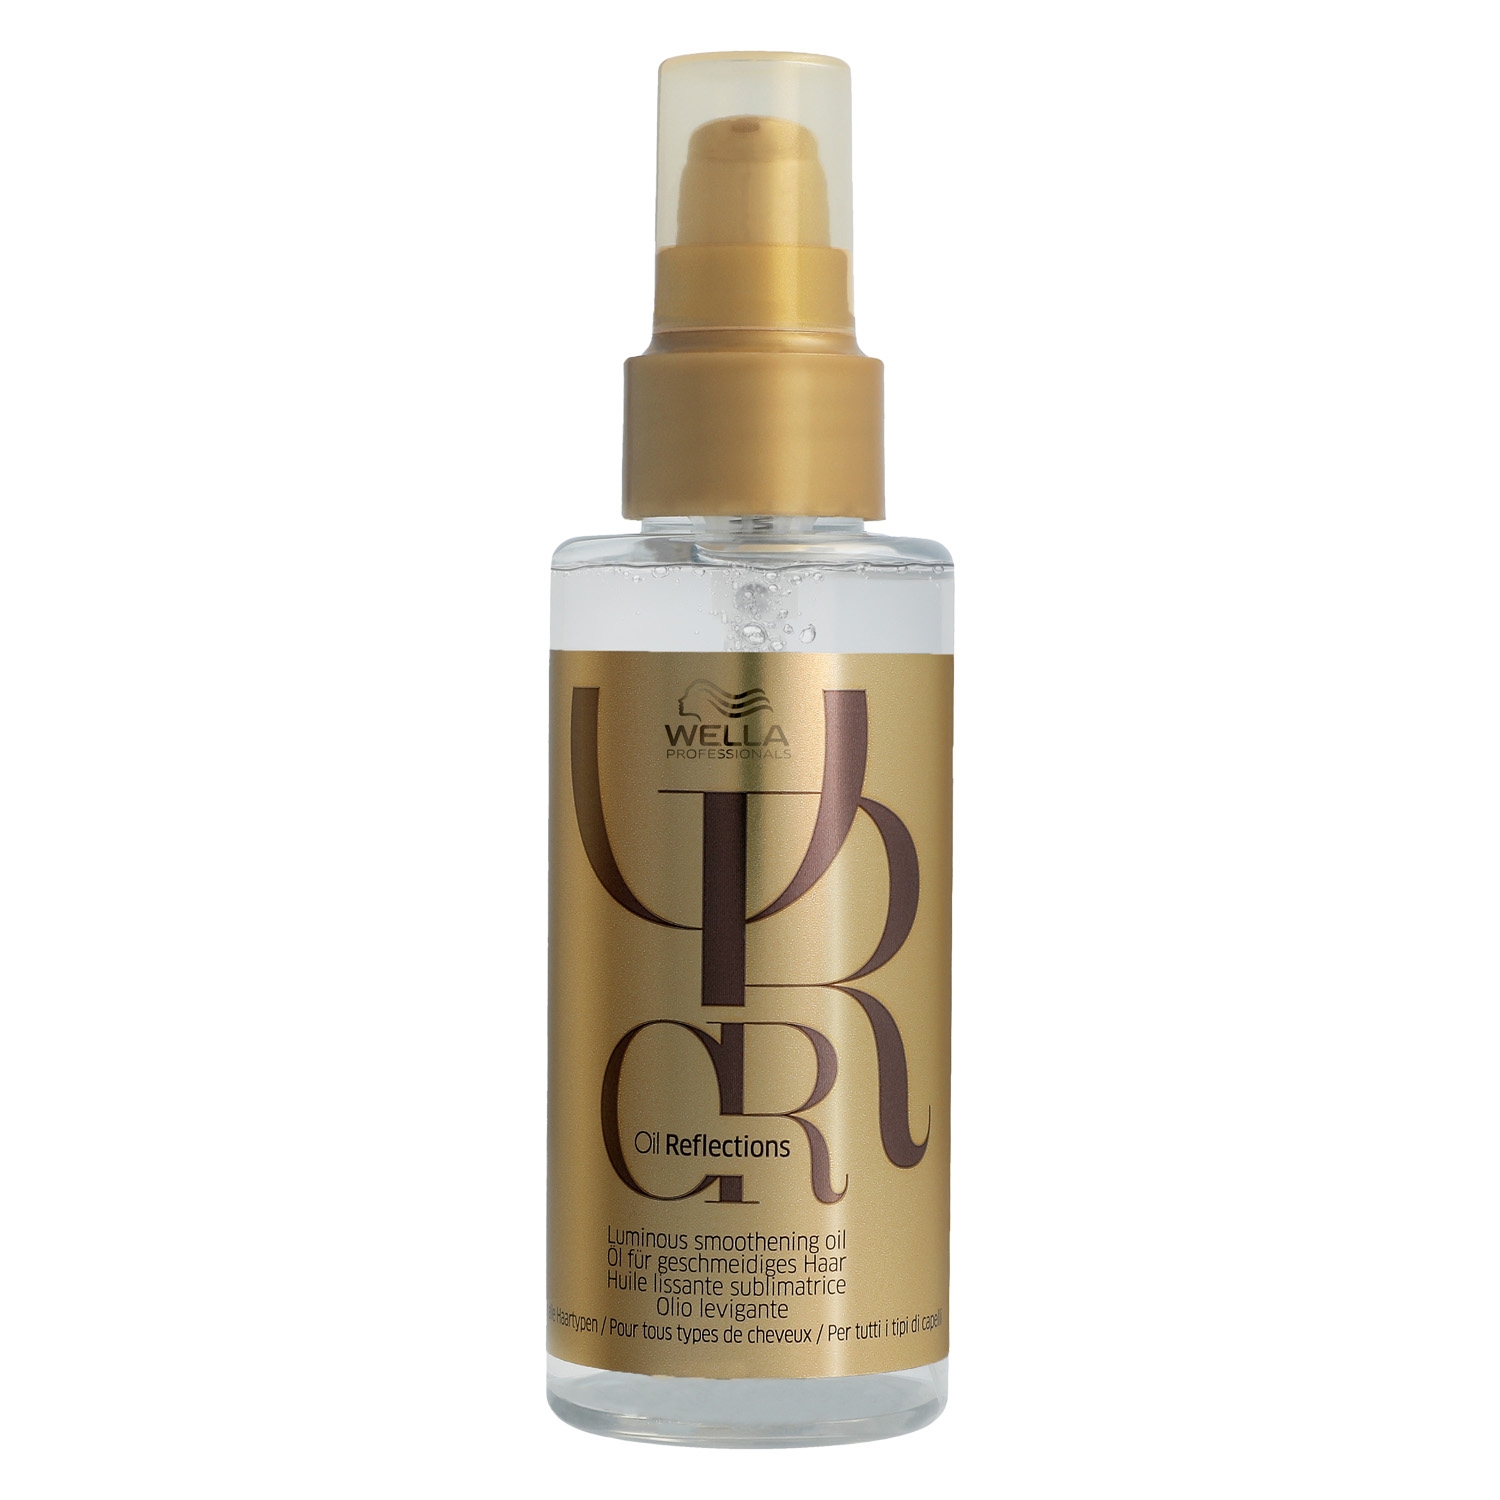 Product image from Oil Reflections - Luminous Smoothening Oil